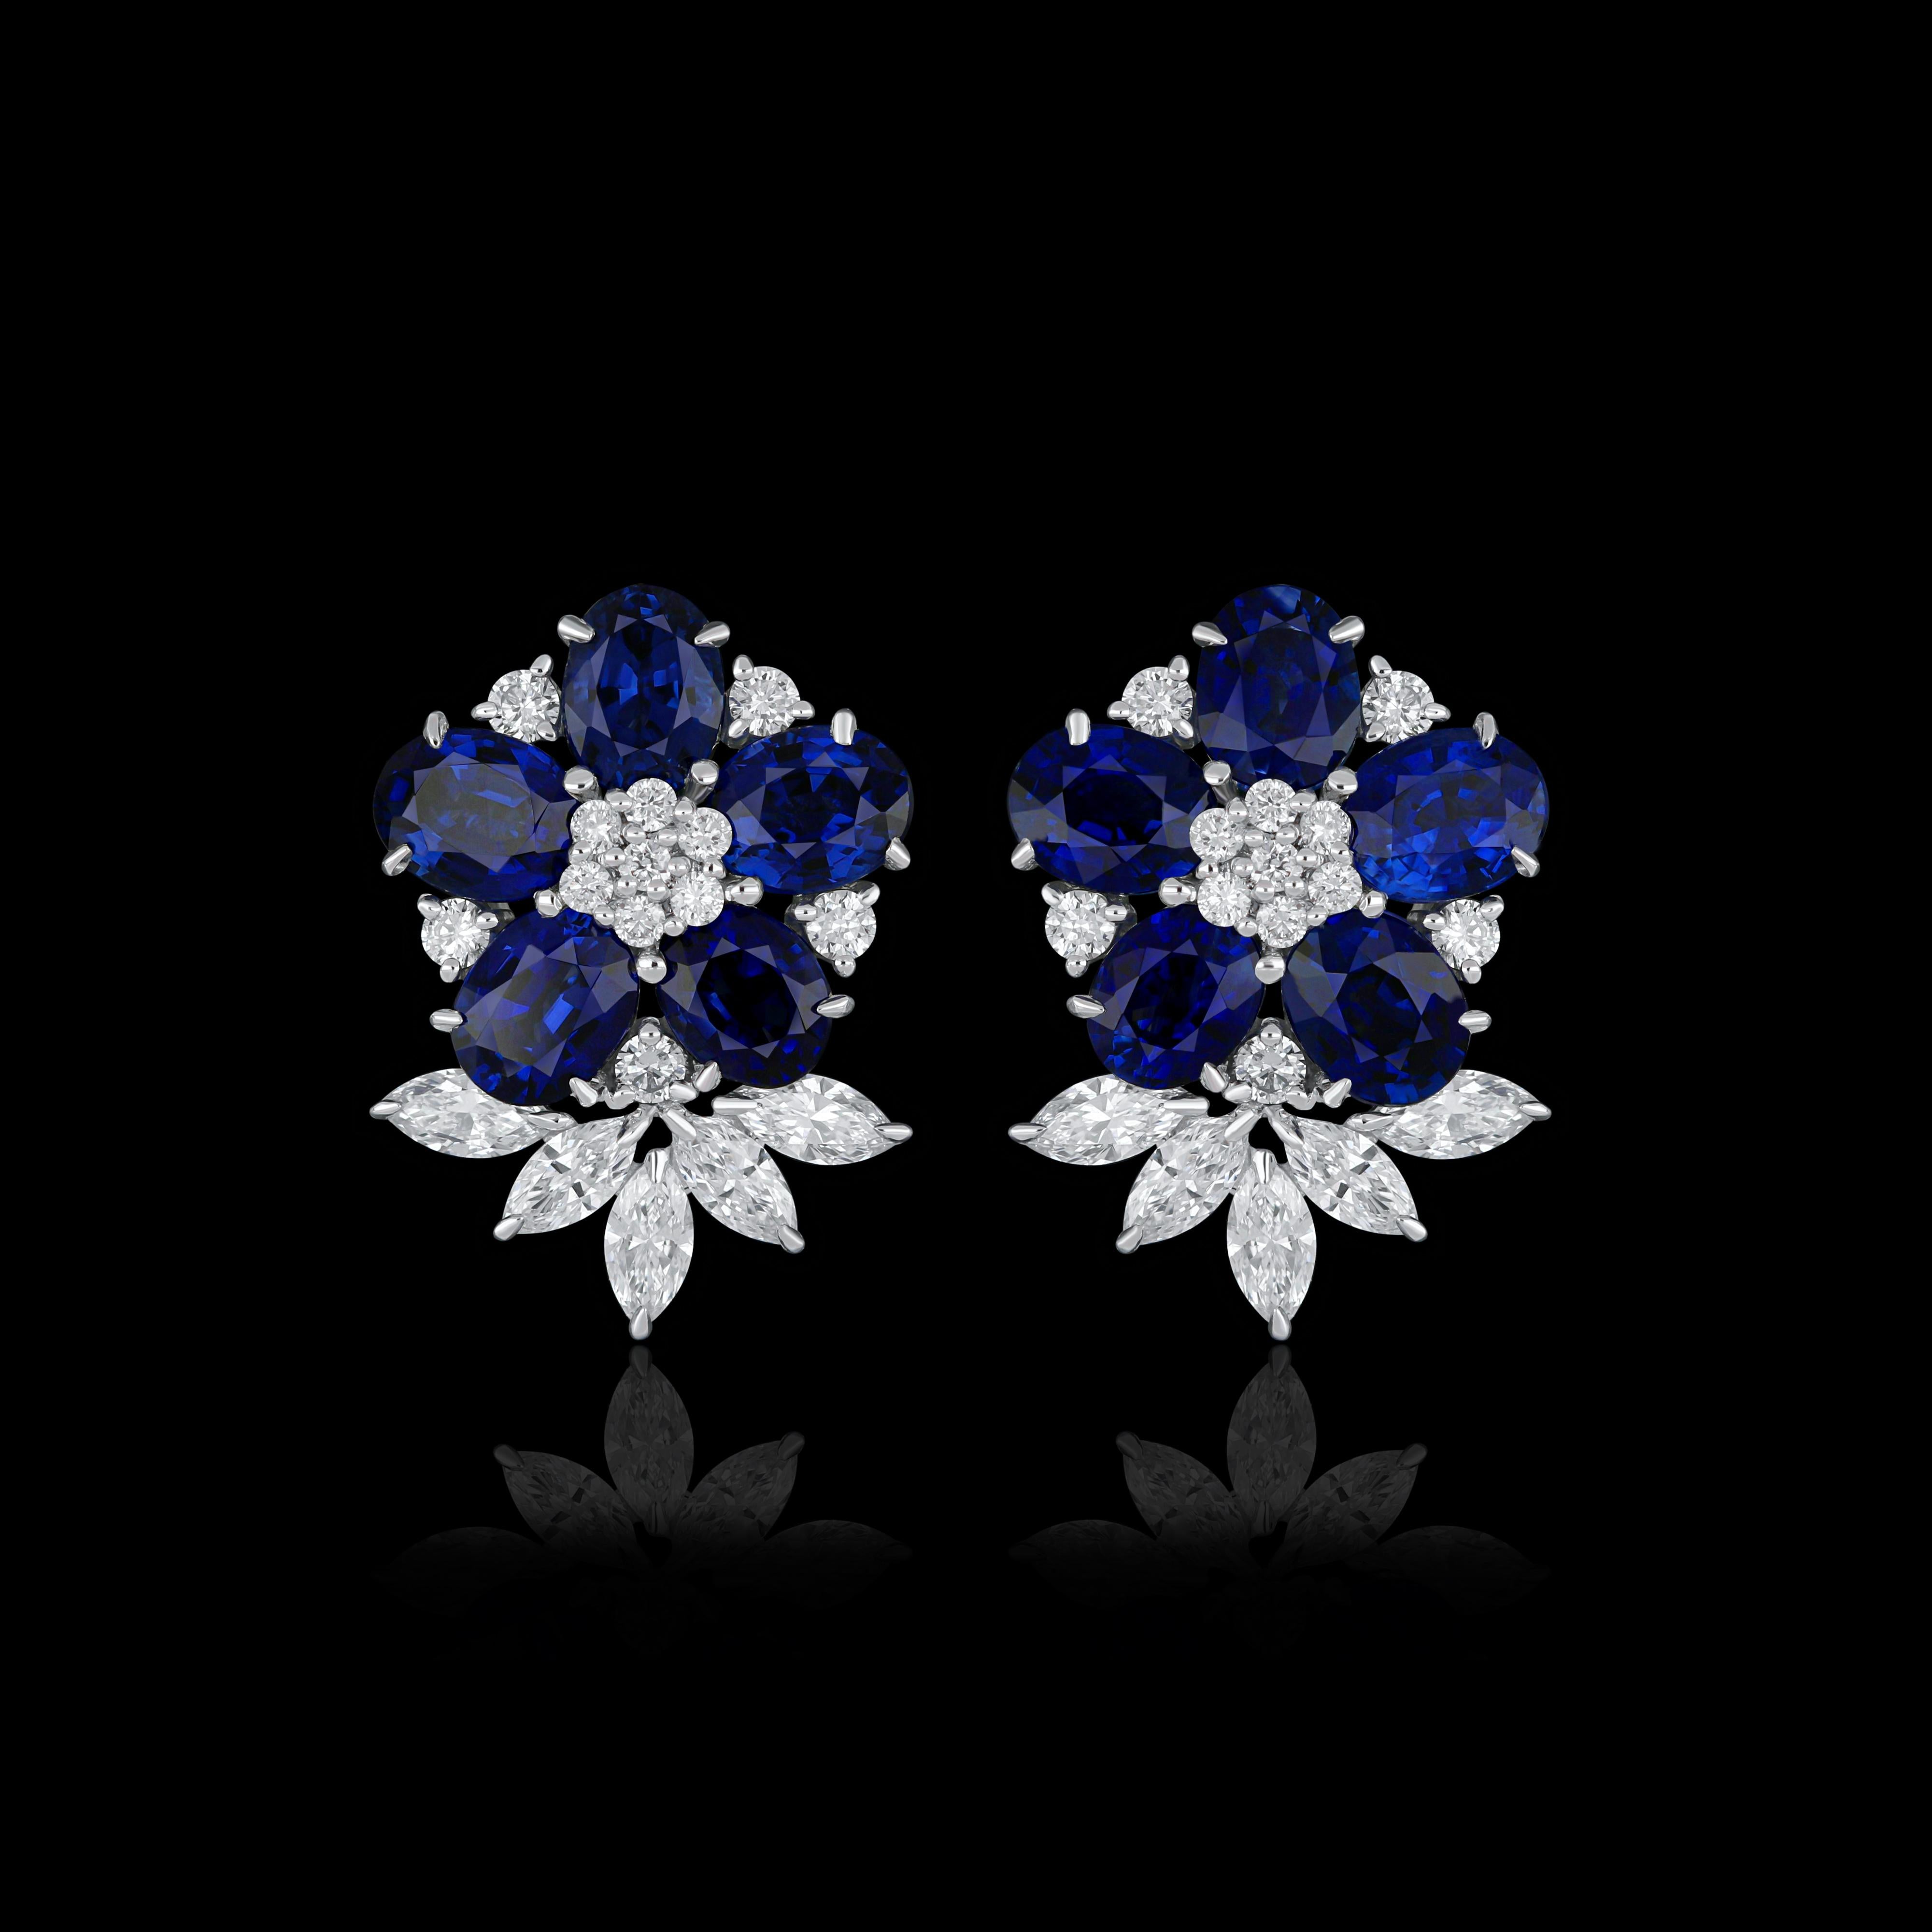 Elegant and exquisitely detailed 18 Karat White Gold Earring, center set with 4.45Cts .Oval Shape Blue Sapphire and micro pave set Diamonds, weighing approx. 1.02Cts Beautifully Hand crafted in 18 Karat White Gold.

Stone Detail:
Blue Sapphire: